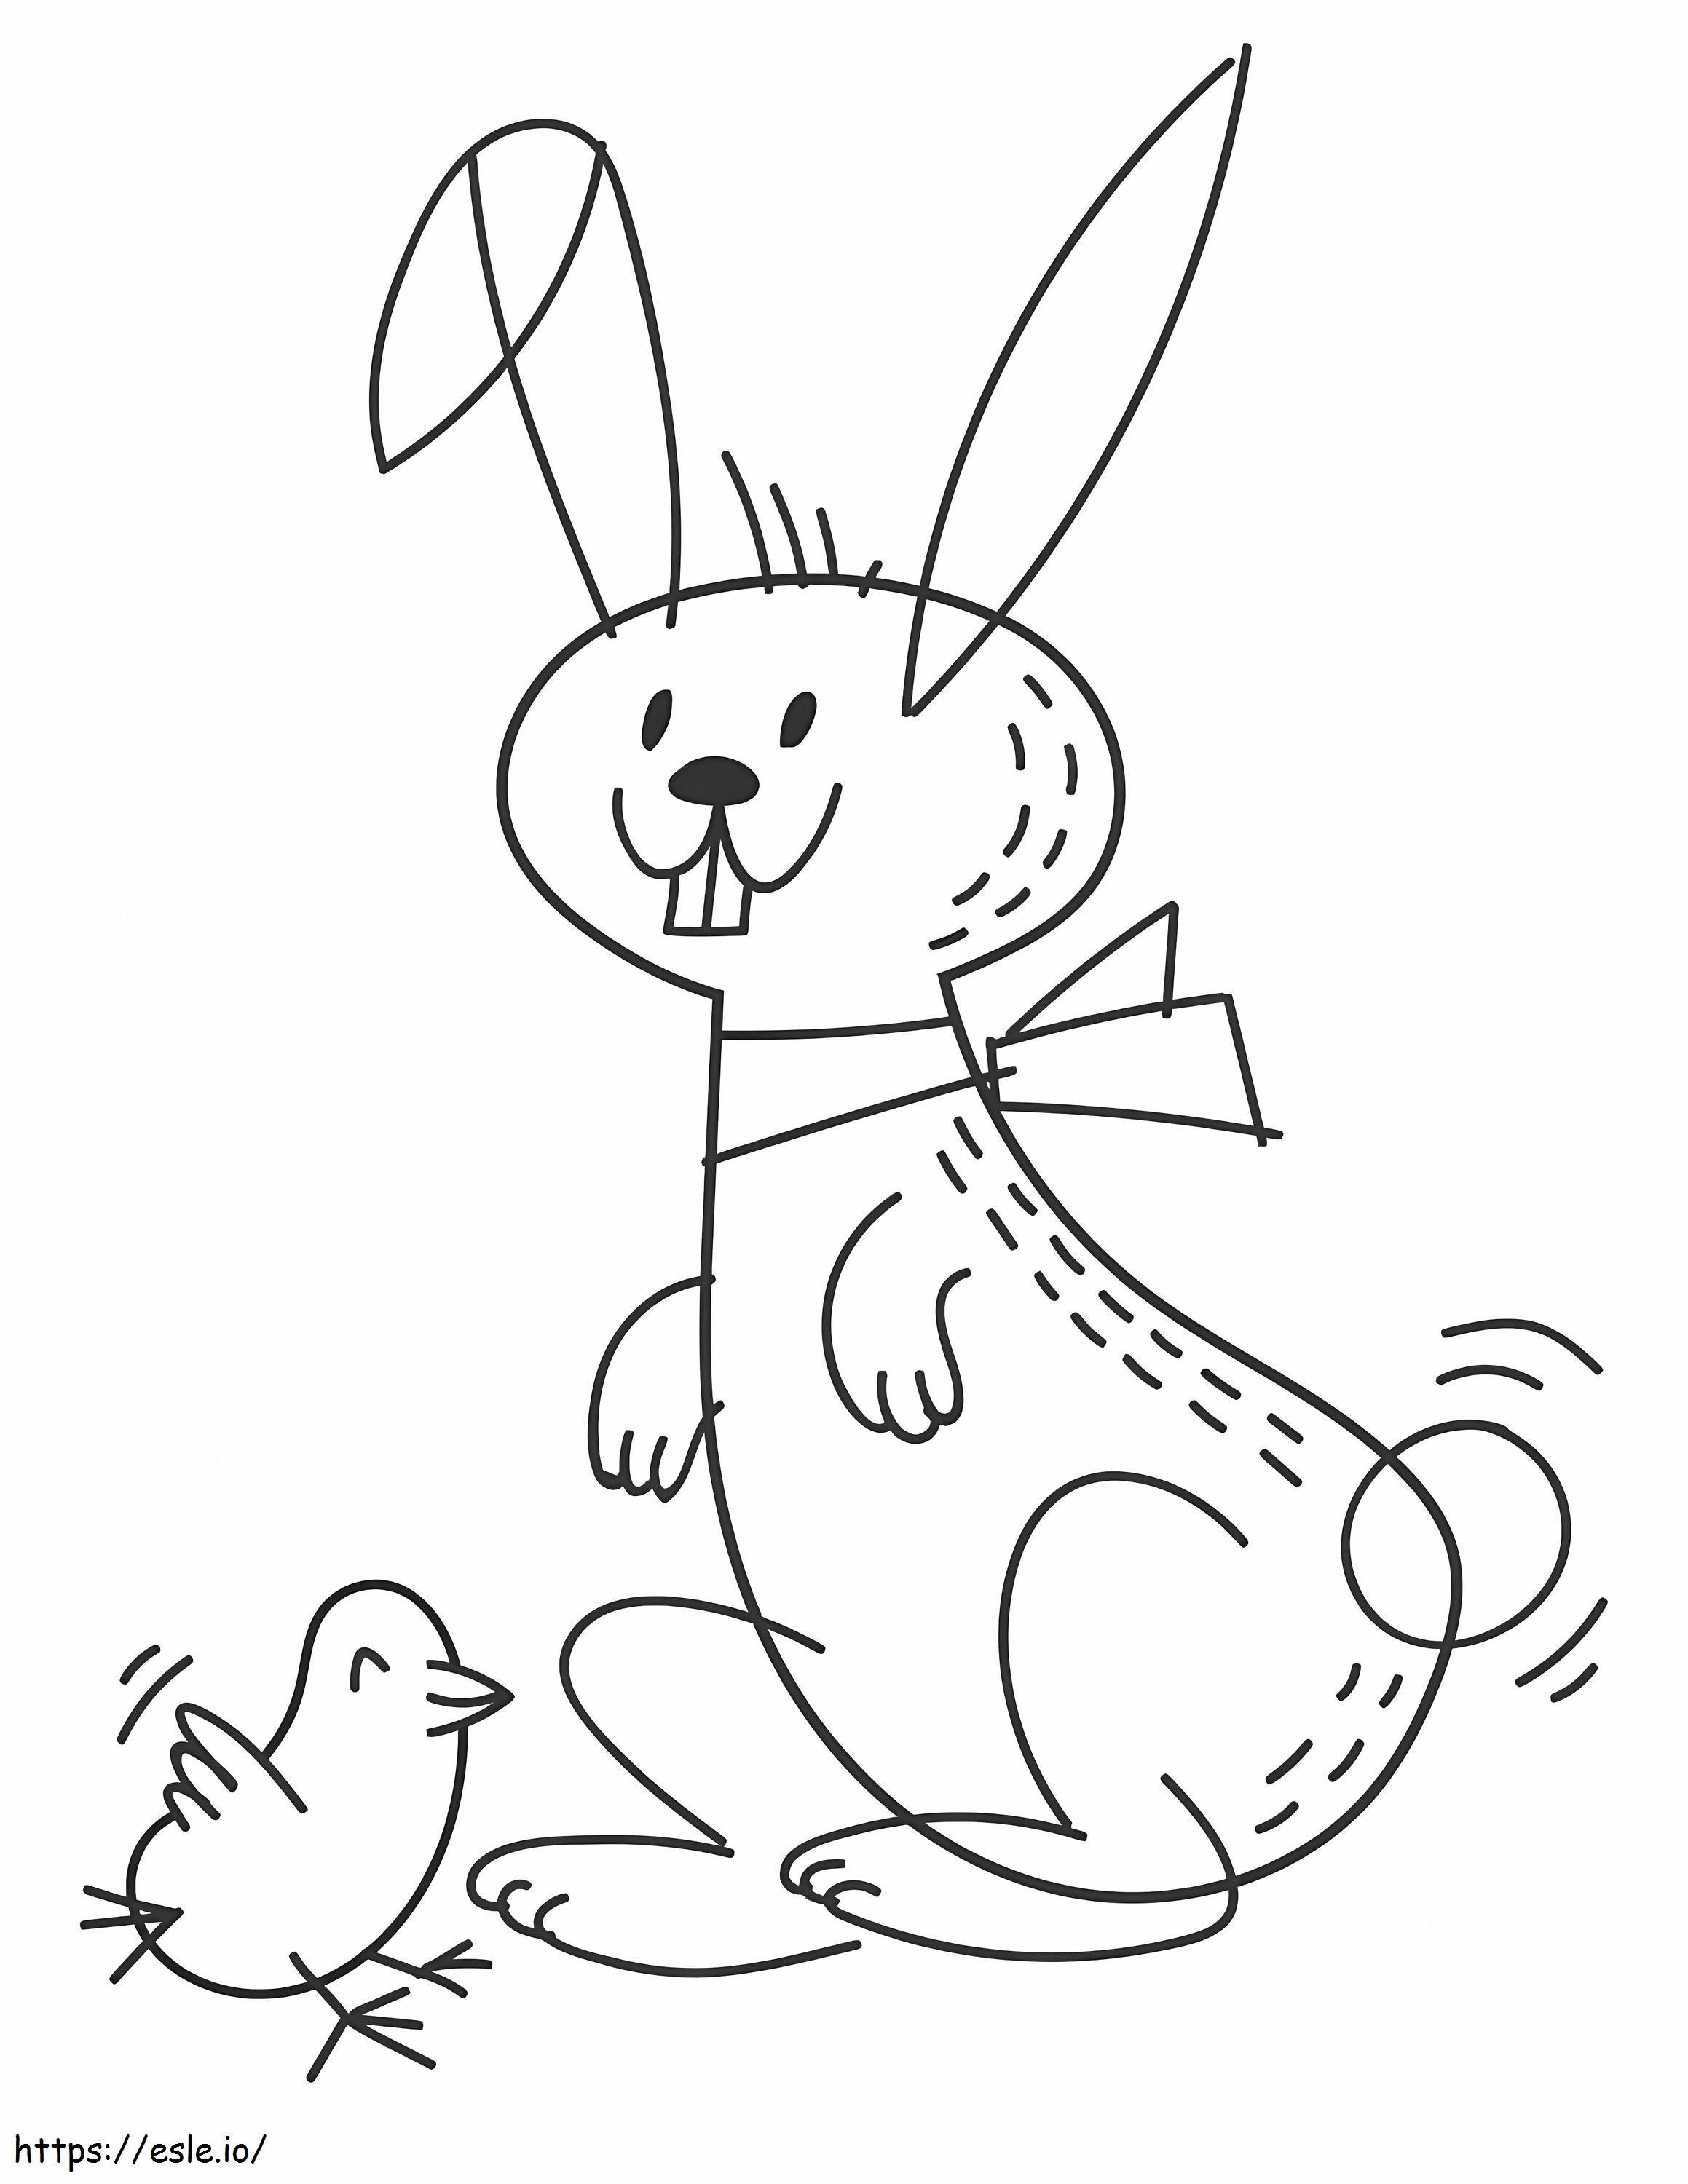 Drawing Easter Bunny And Chick coloring page